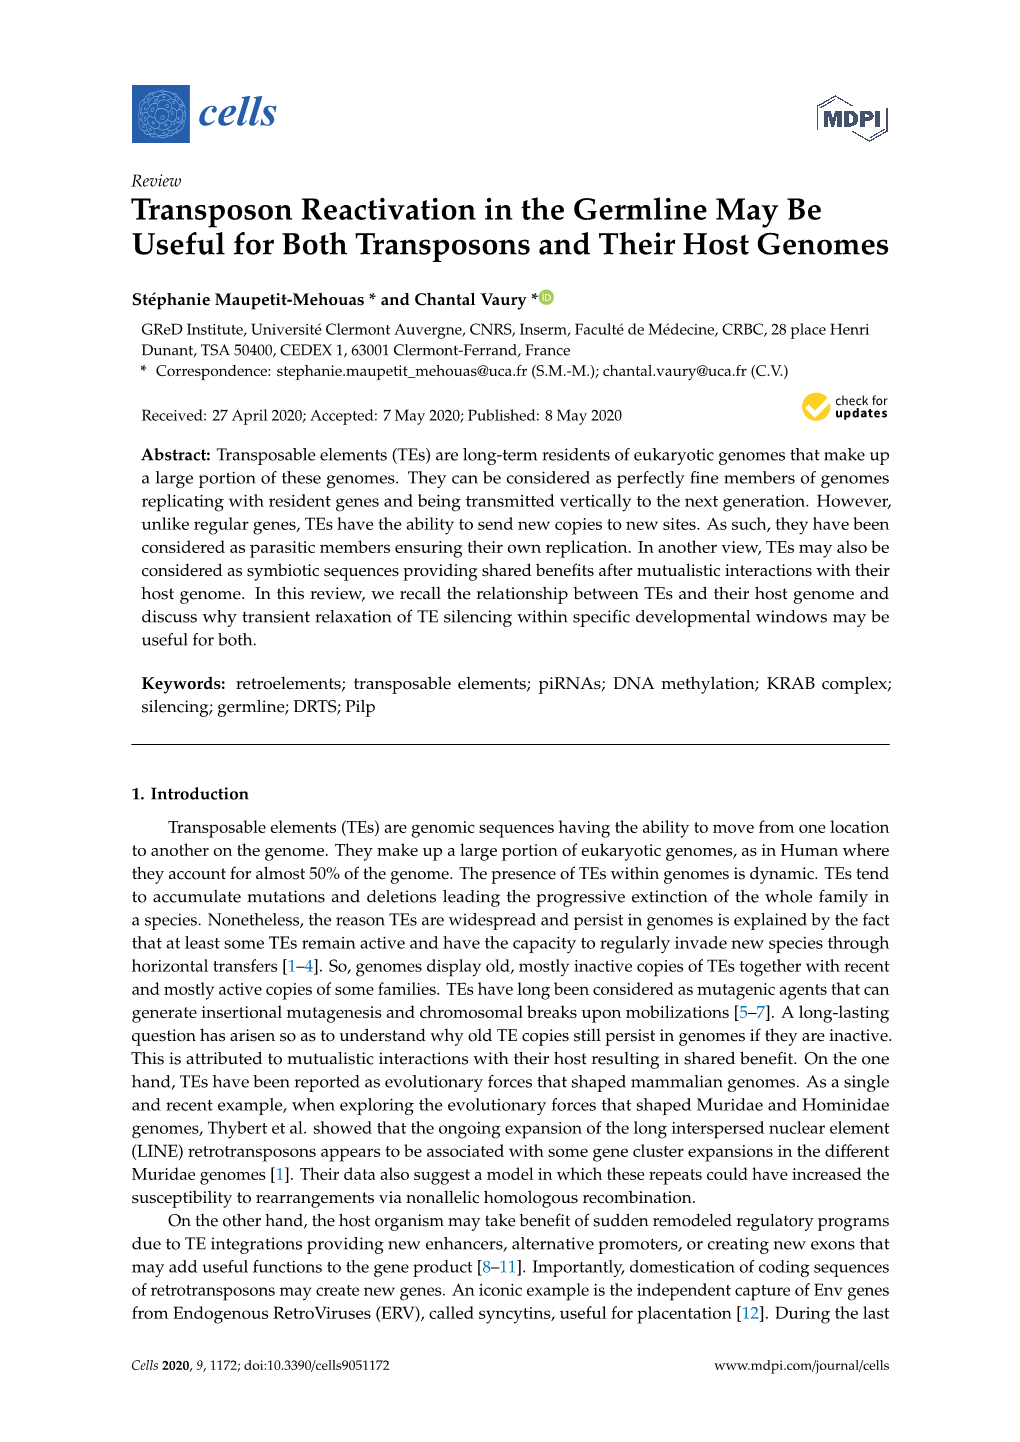 Transposon Reactivation in the Germline May Be Useful for Both Transposons and Their Host Genomes